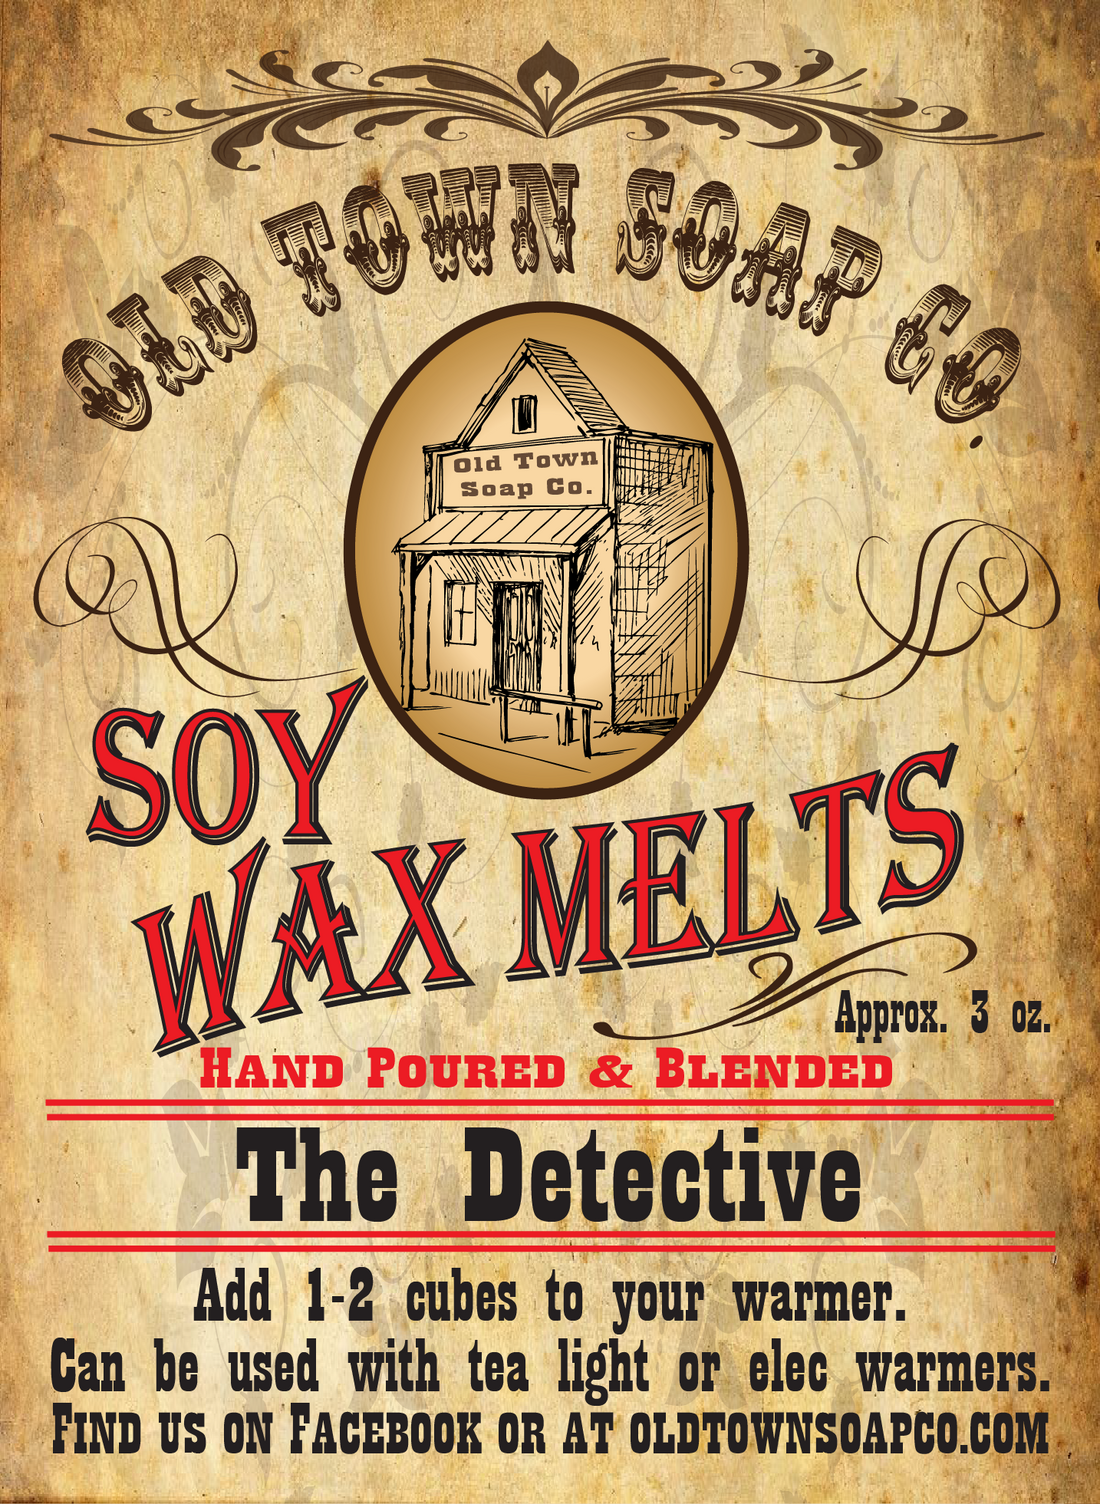 The Detective Wax Melts